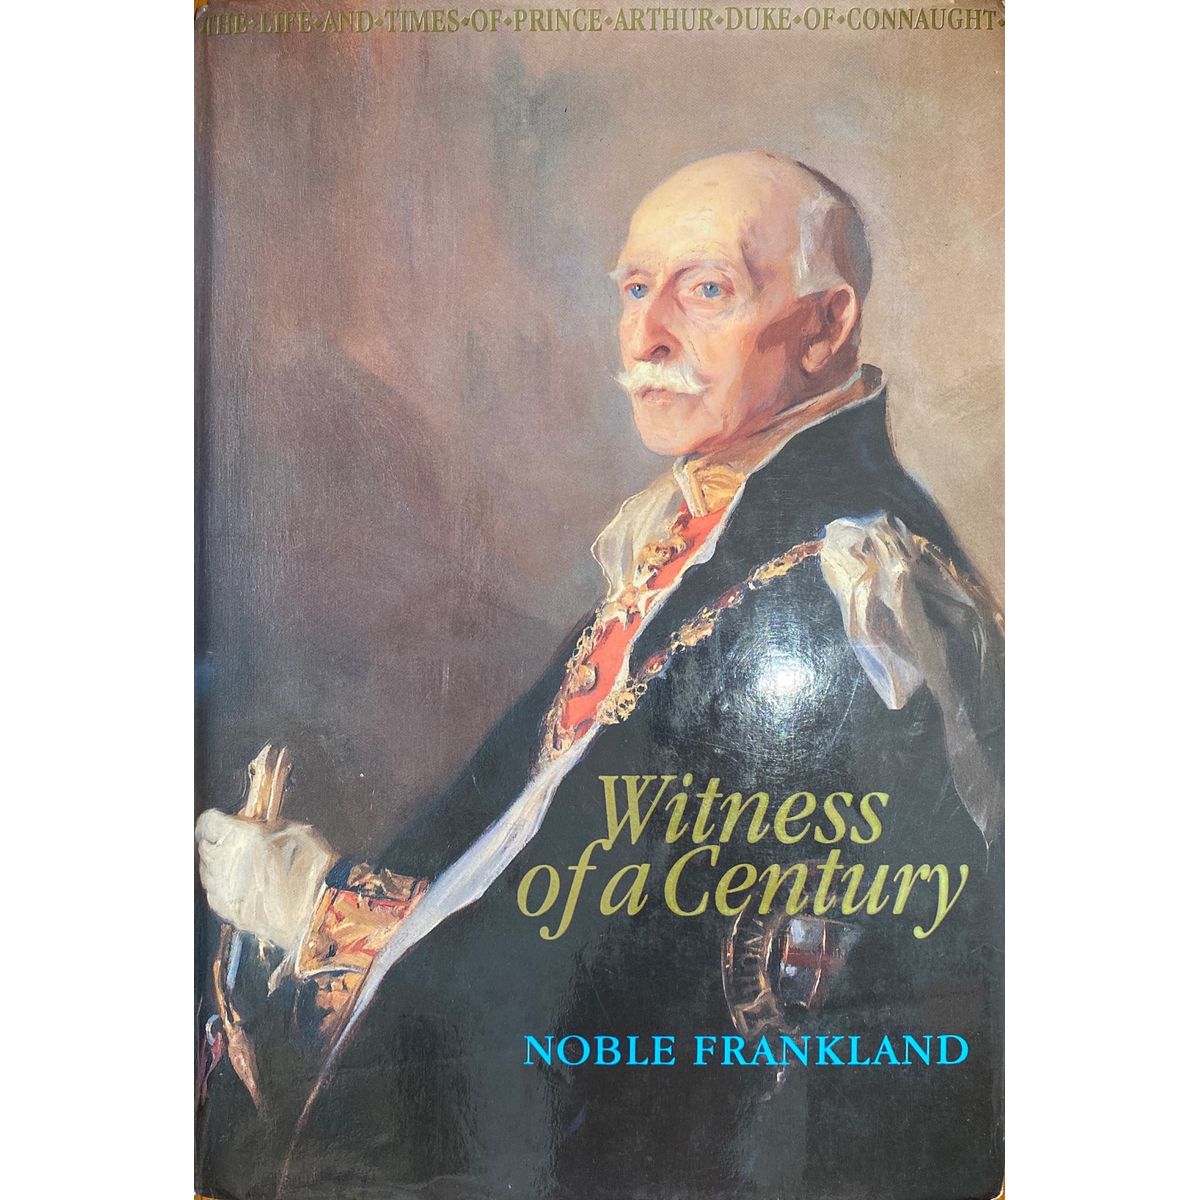 ISBN: 9780856831362 / 0856831360 - Witness of a Century: The Life and Times of Prince Arthur Duke of Connaught 1850-1942 by Noble Frankland [1993]